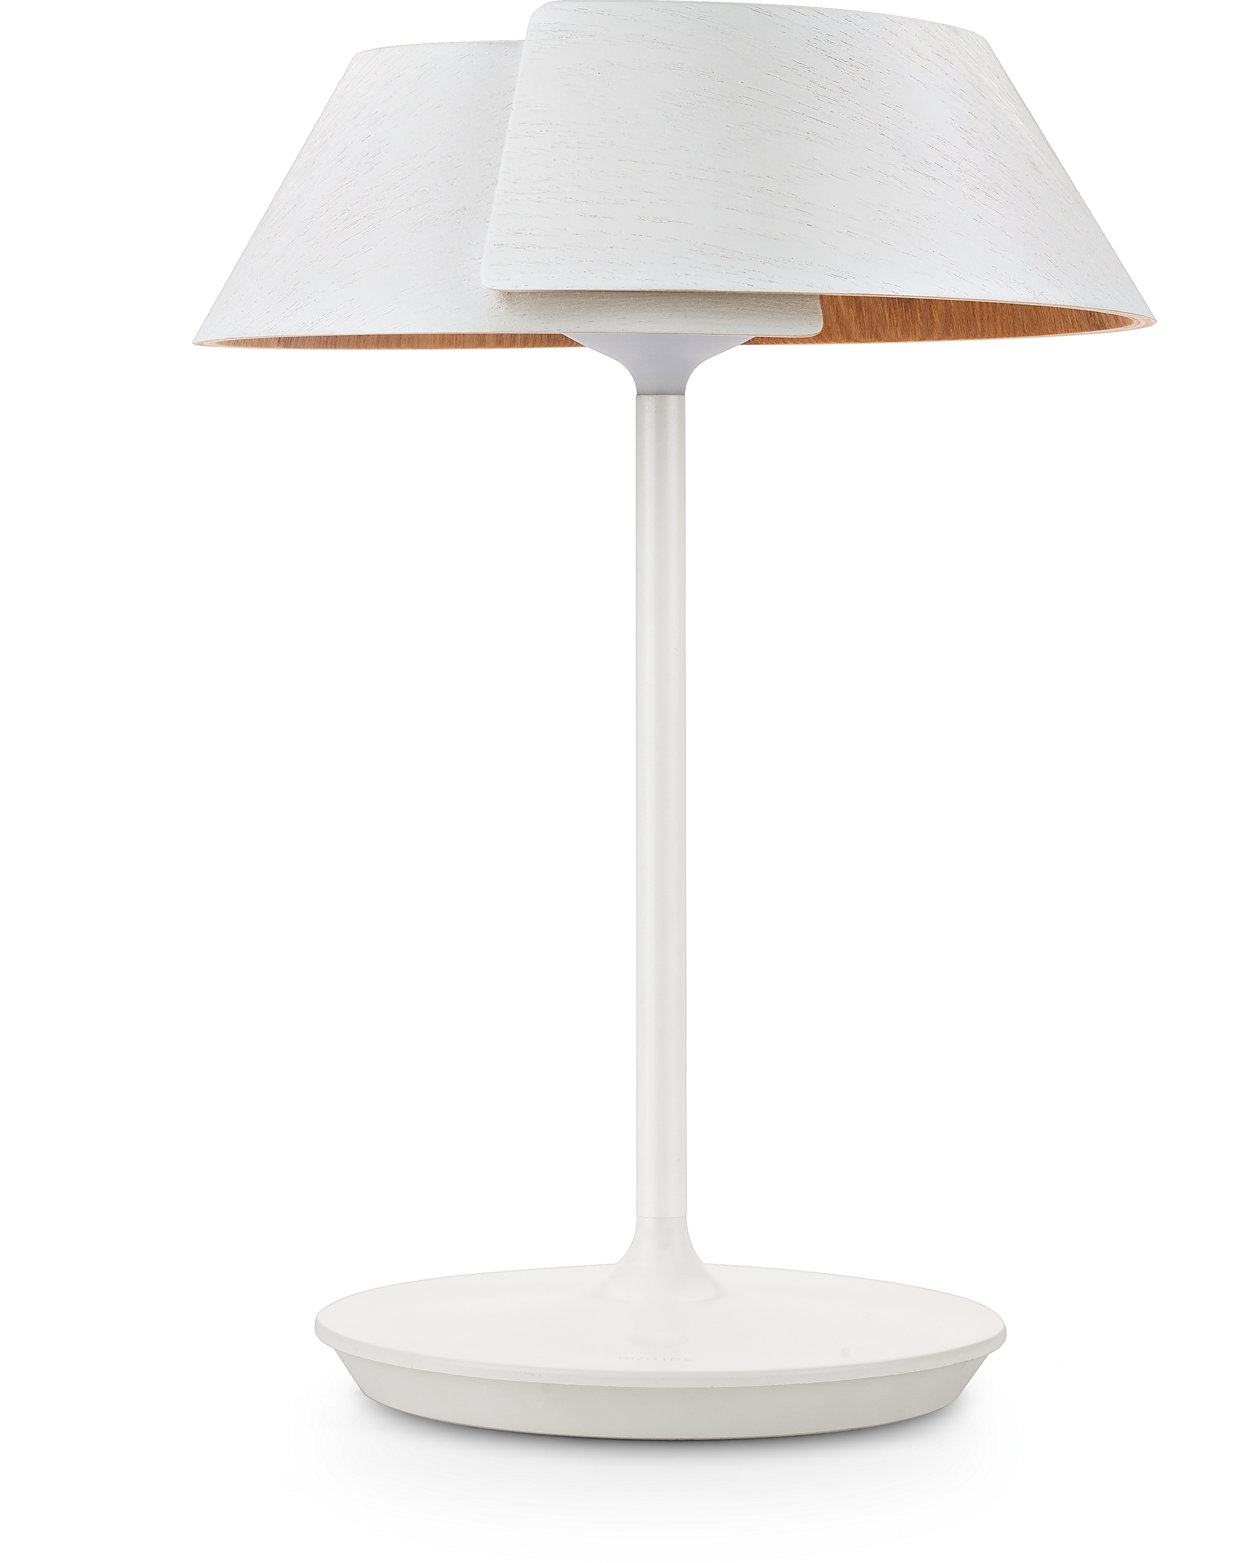 Myliving Table Lamp 4902331i0 Philips, Philips Myliving Table Lamp